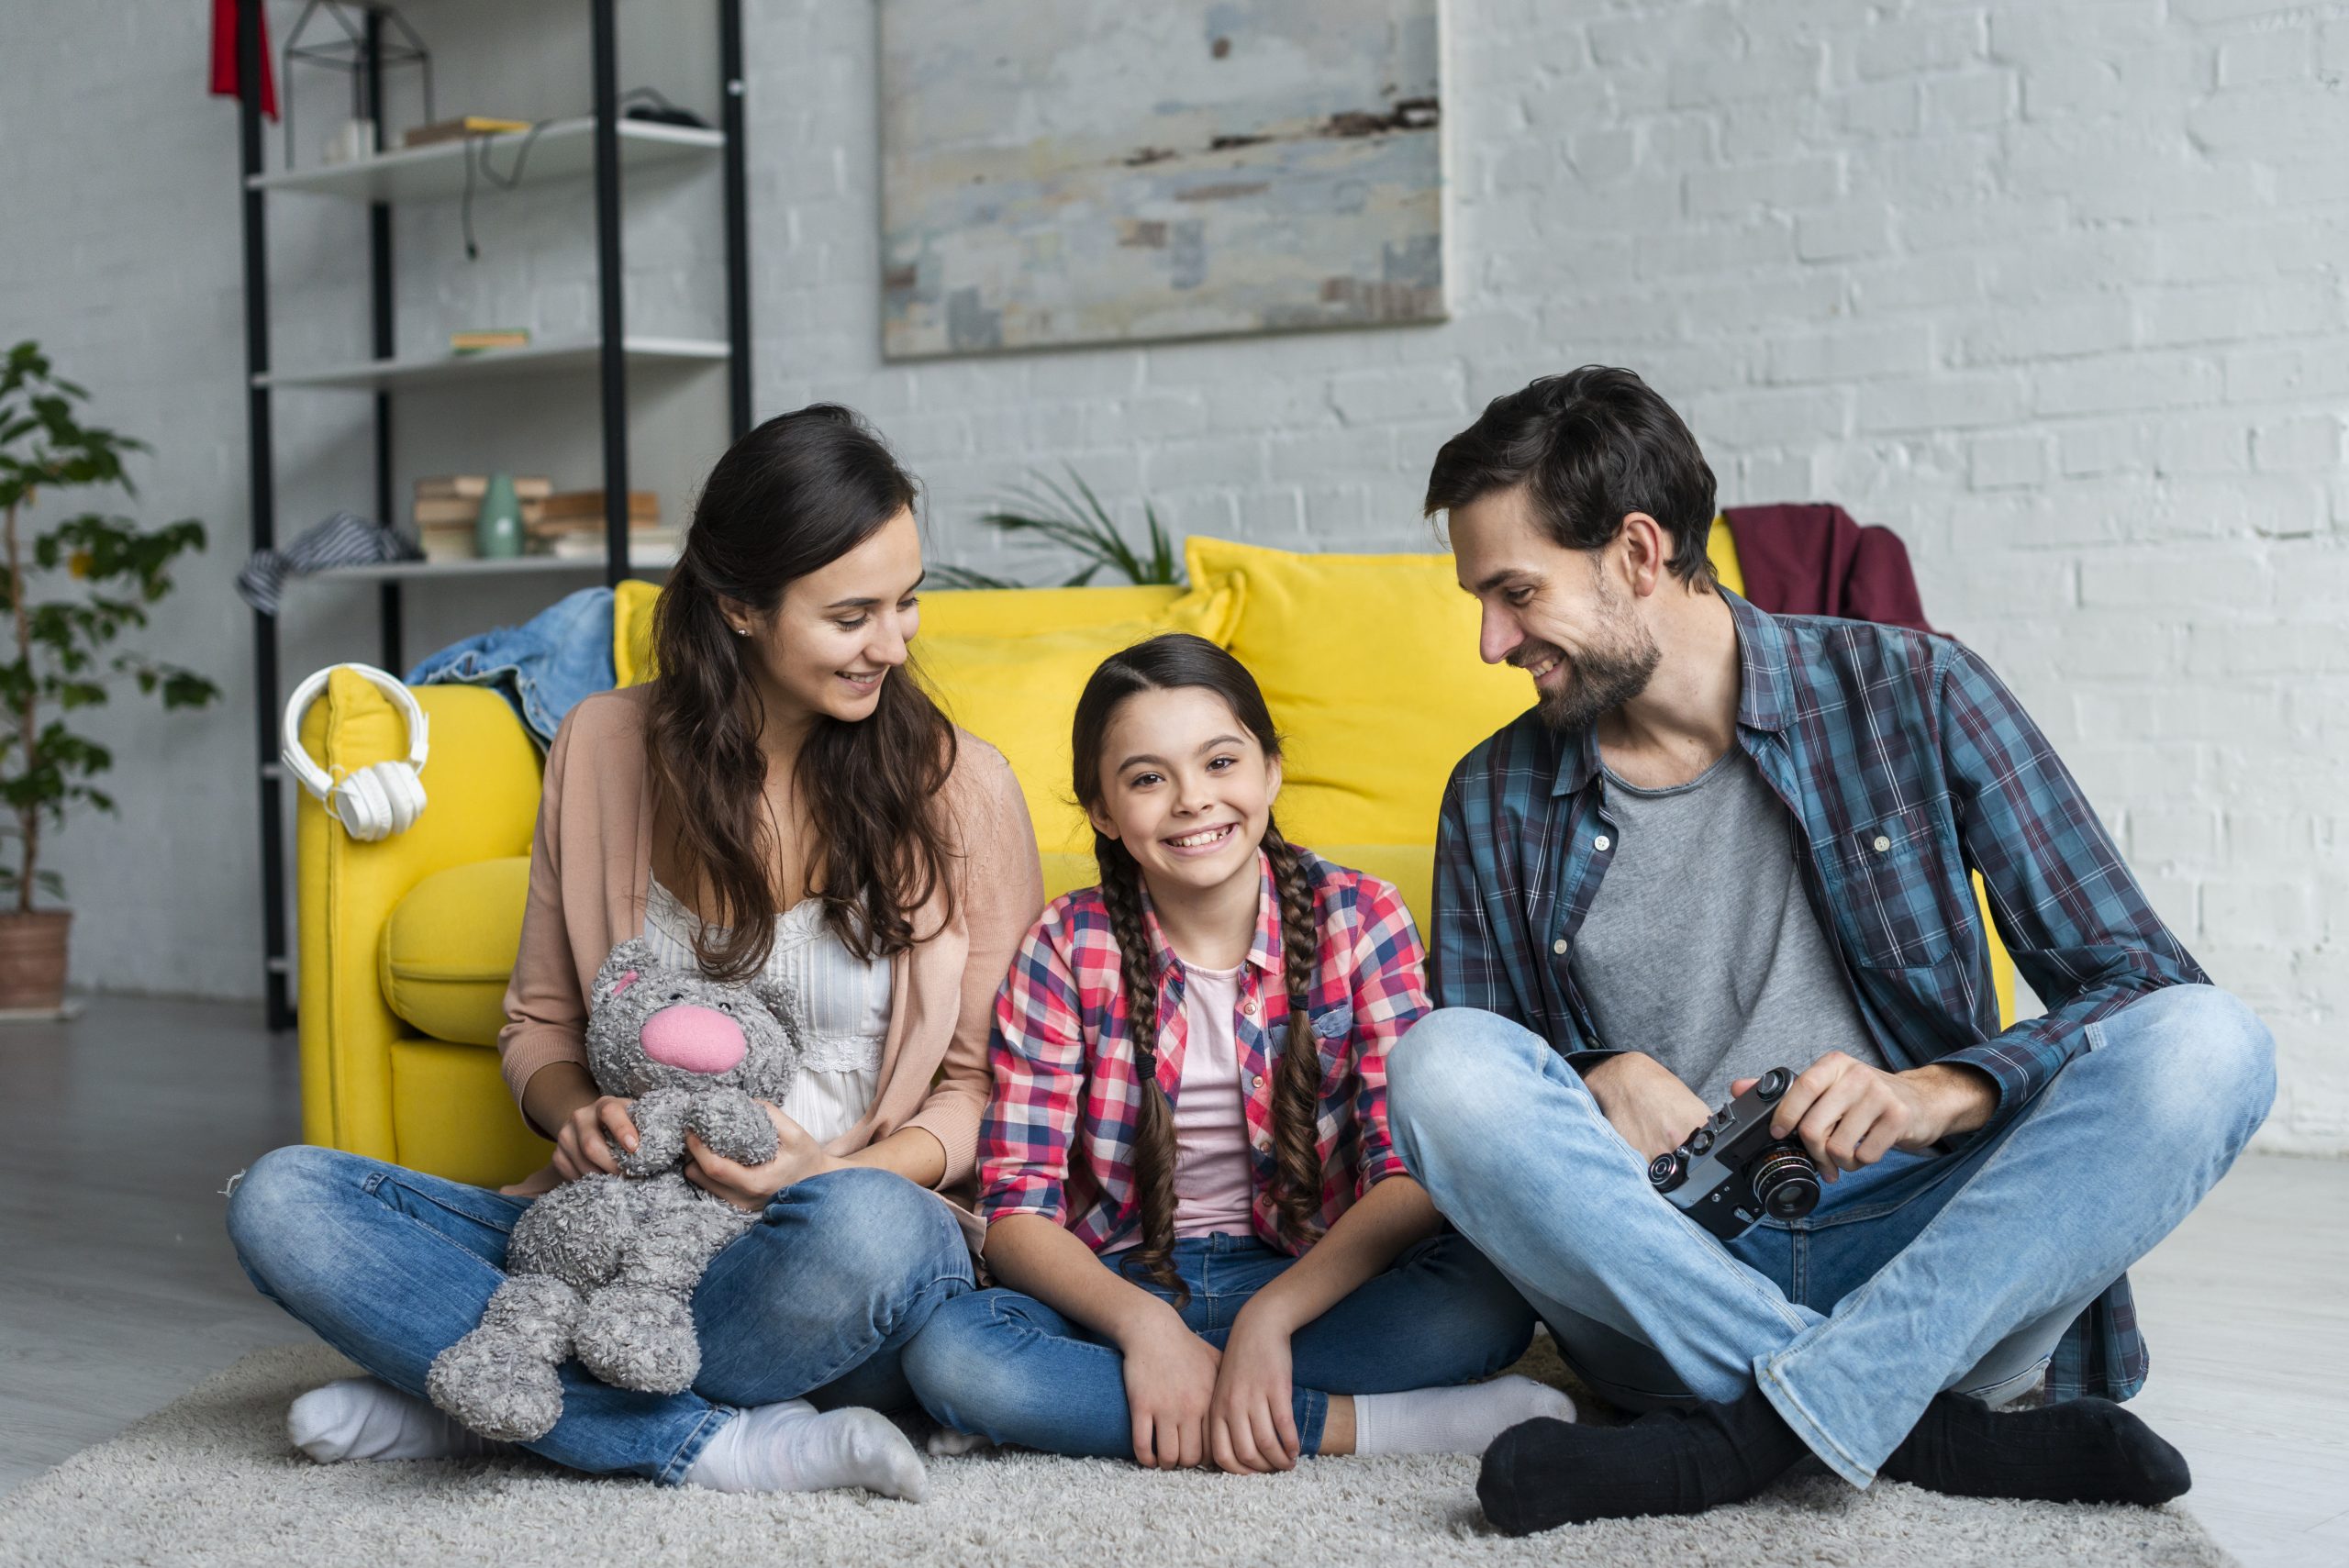 A family with a young girl sitting on the floor, smiling and holding a camera. 